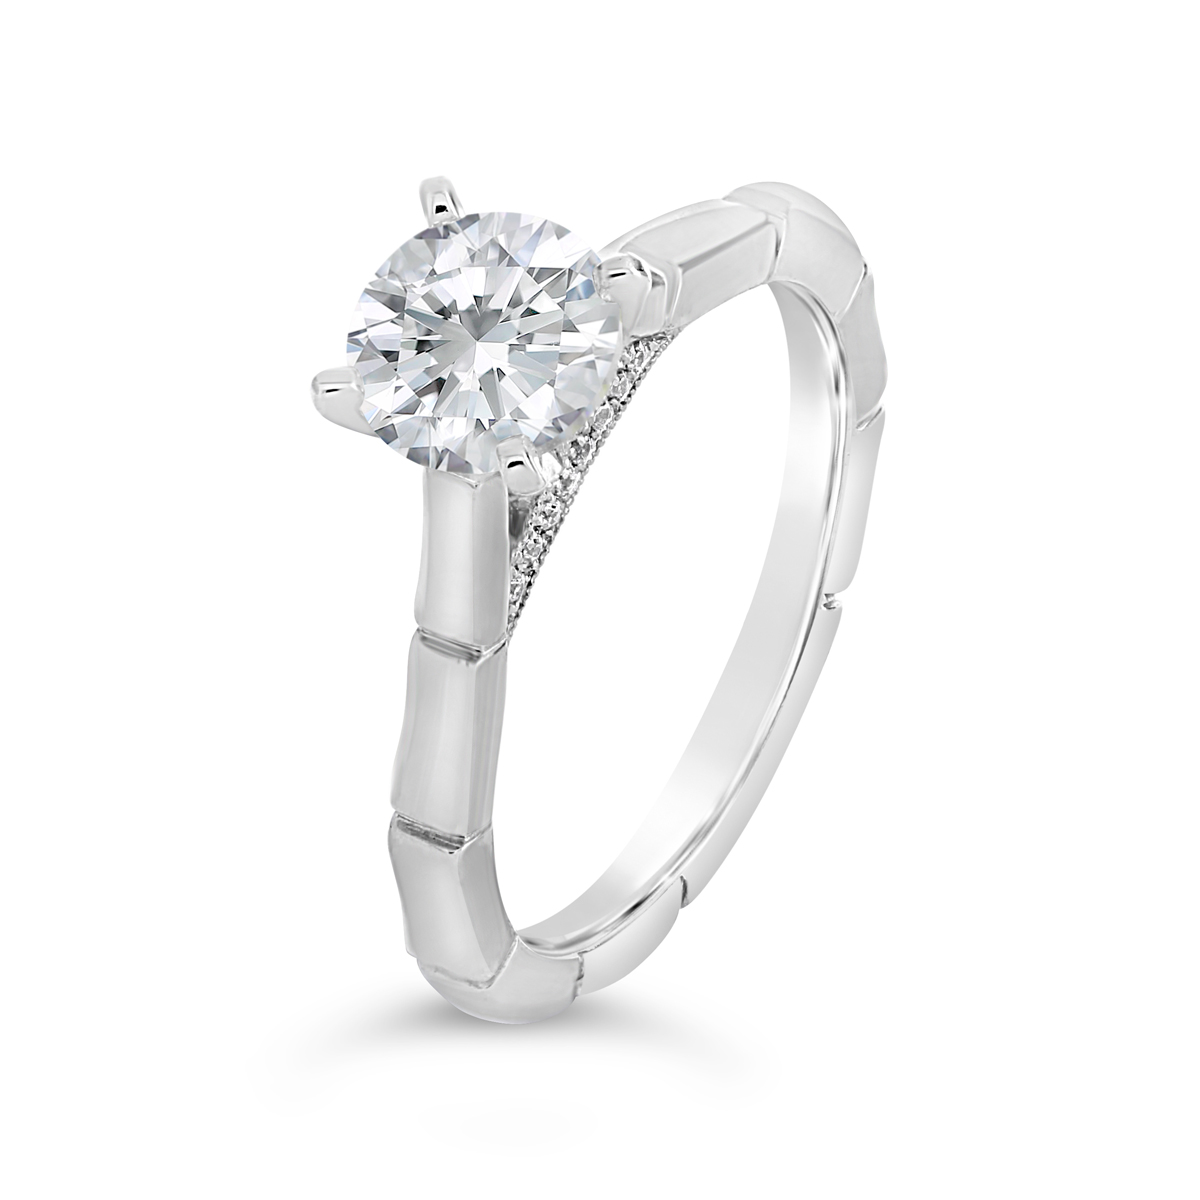 Engagement Rings Melbourne - Locally Made by Larsen